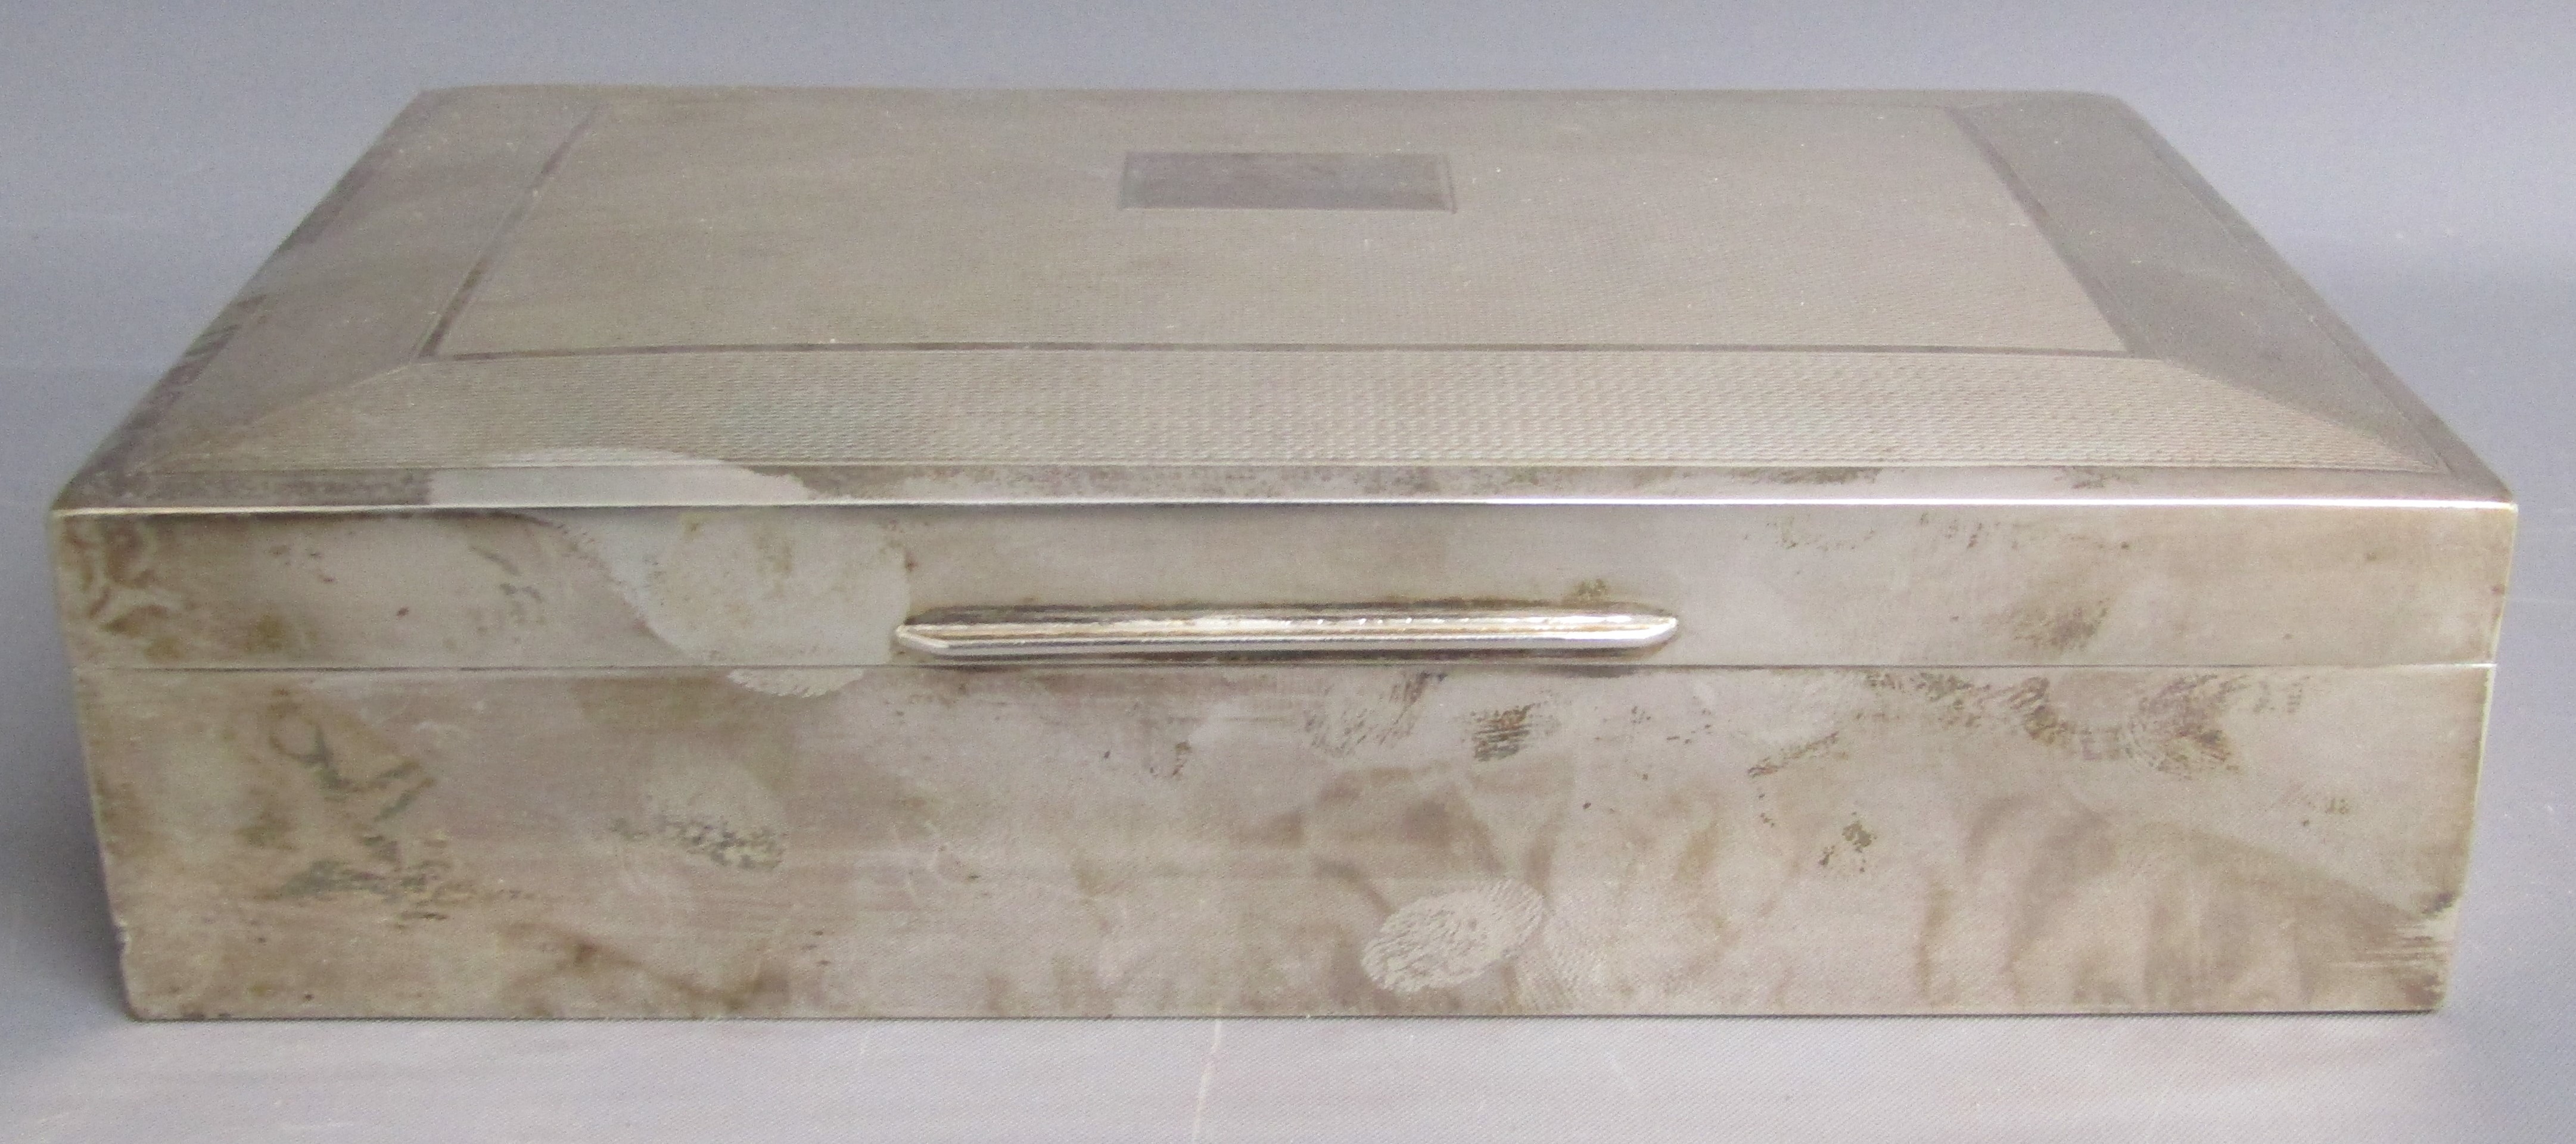 Viner's wood lined silver cigarette box with 2 boxes of matches, Sheffield 1962  - approx. 16.5cm - Image 8 of 16